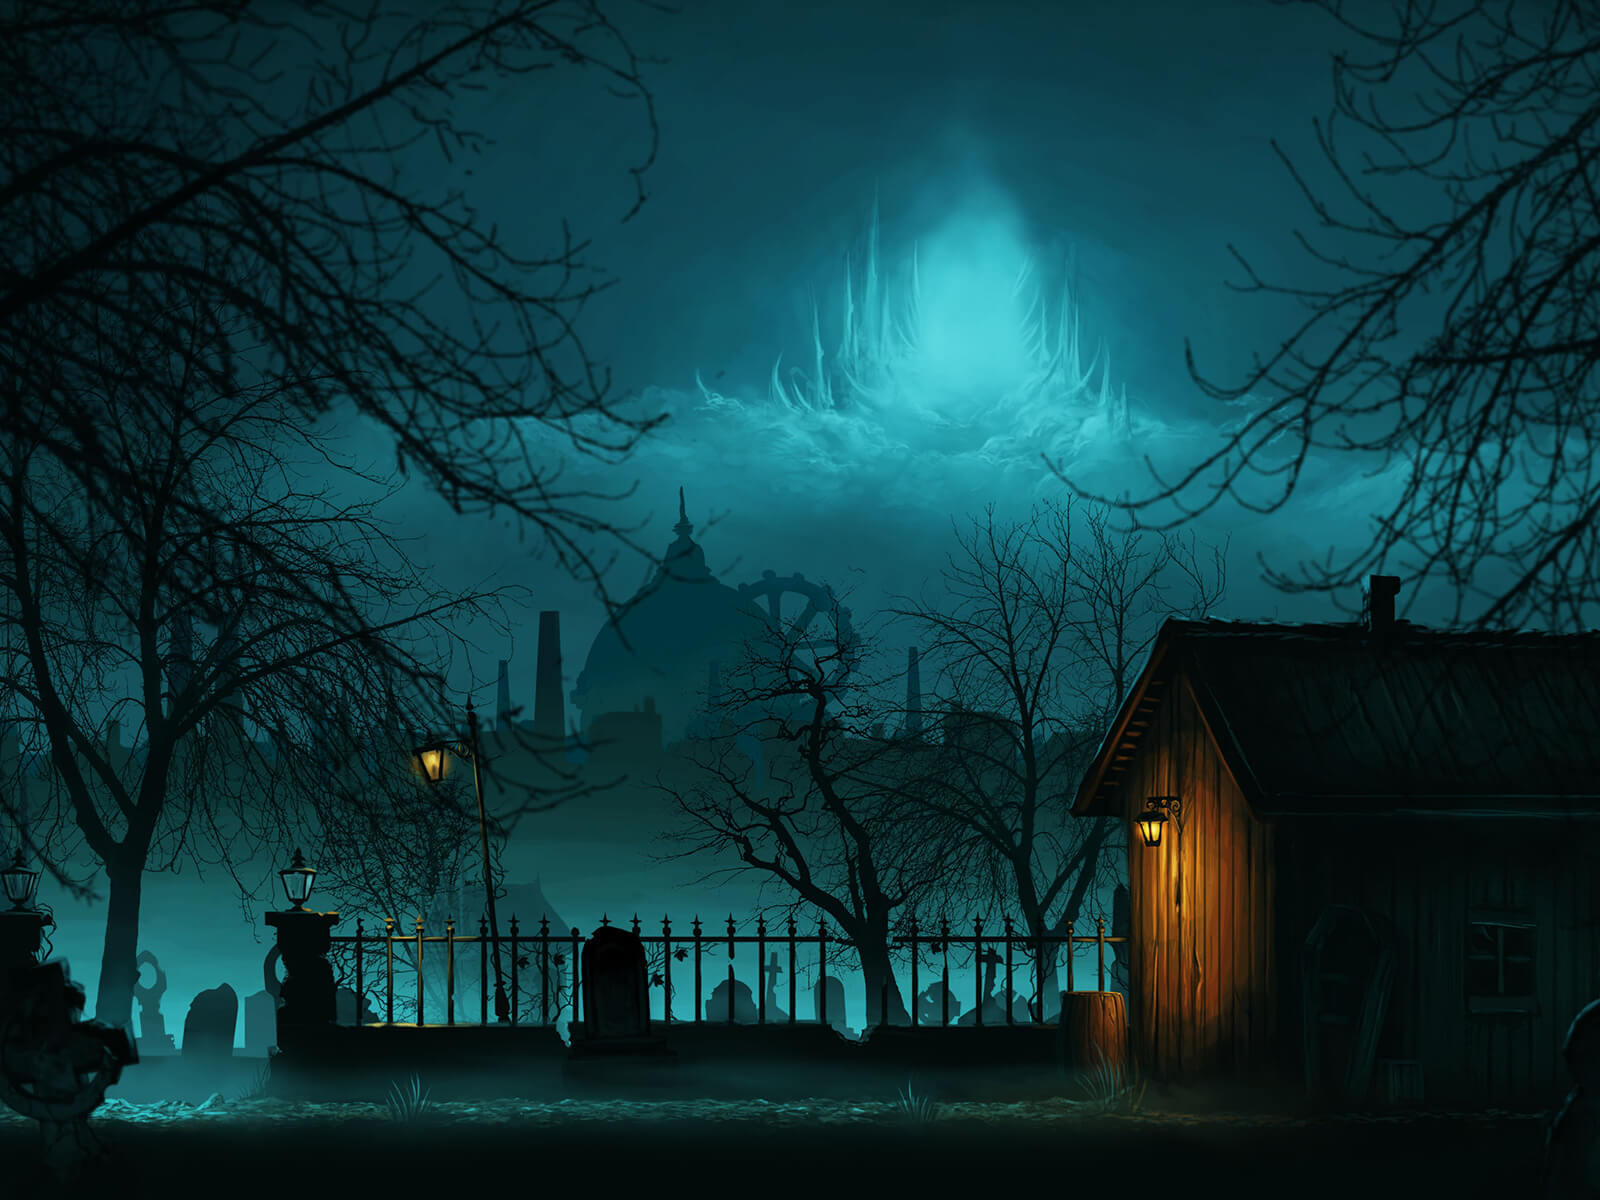 A wooden shack stands in a graveyard at night. The cityscape and sky in the distance are lit with ethereal blue light.